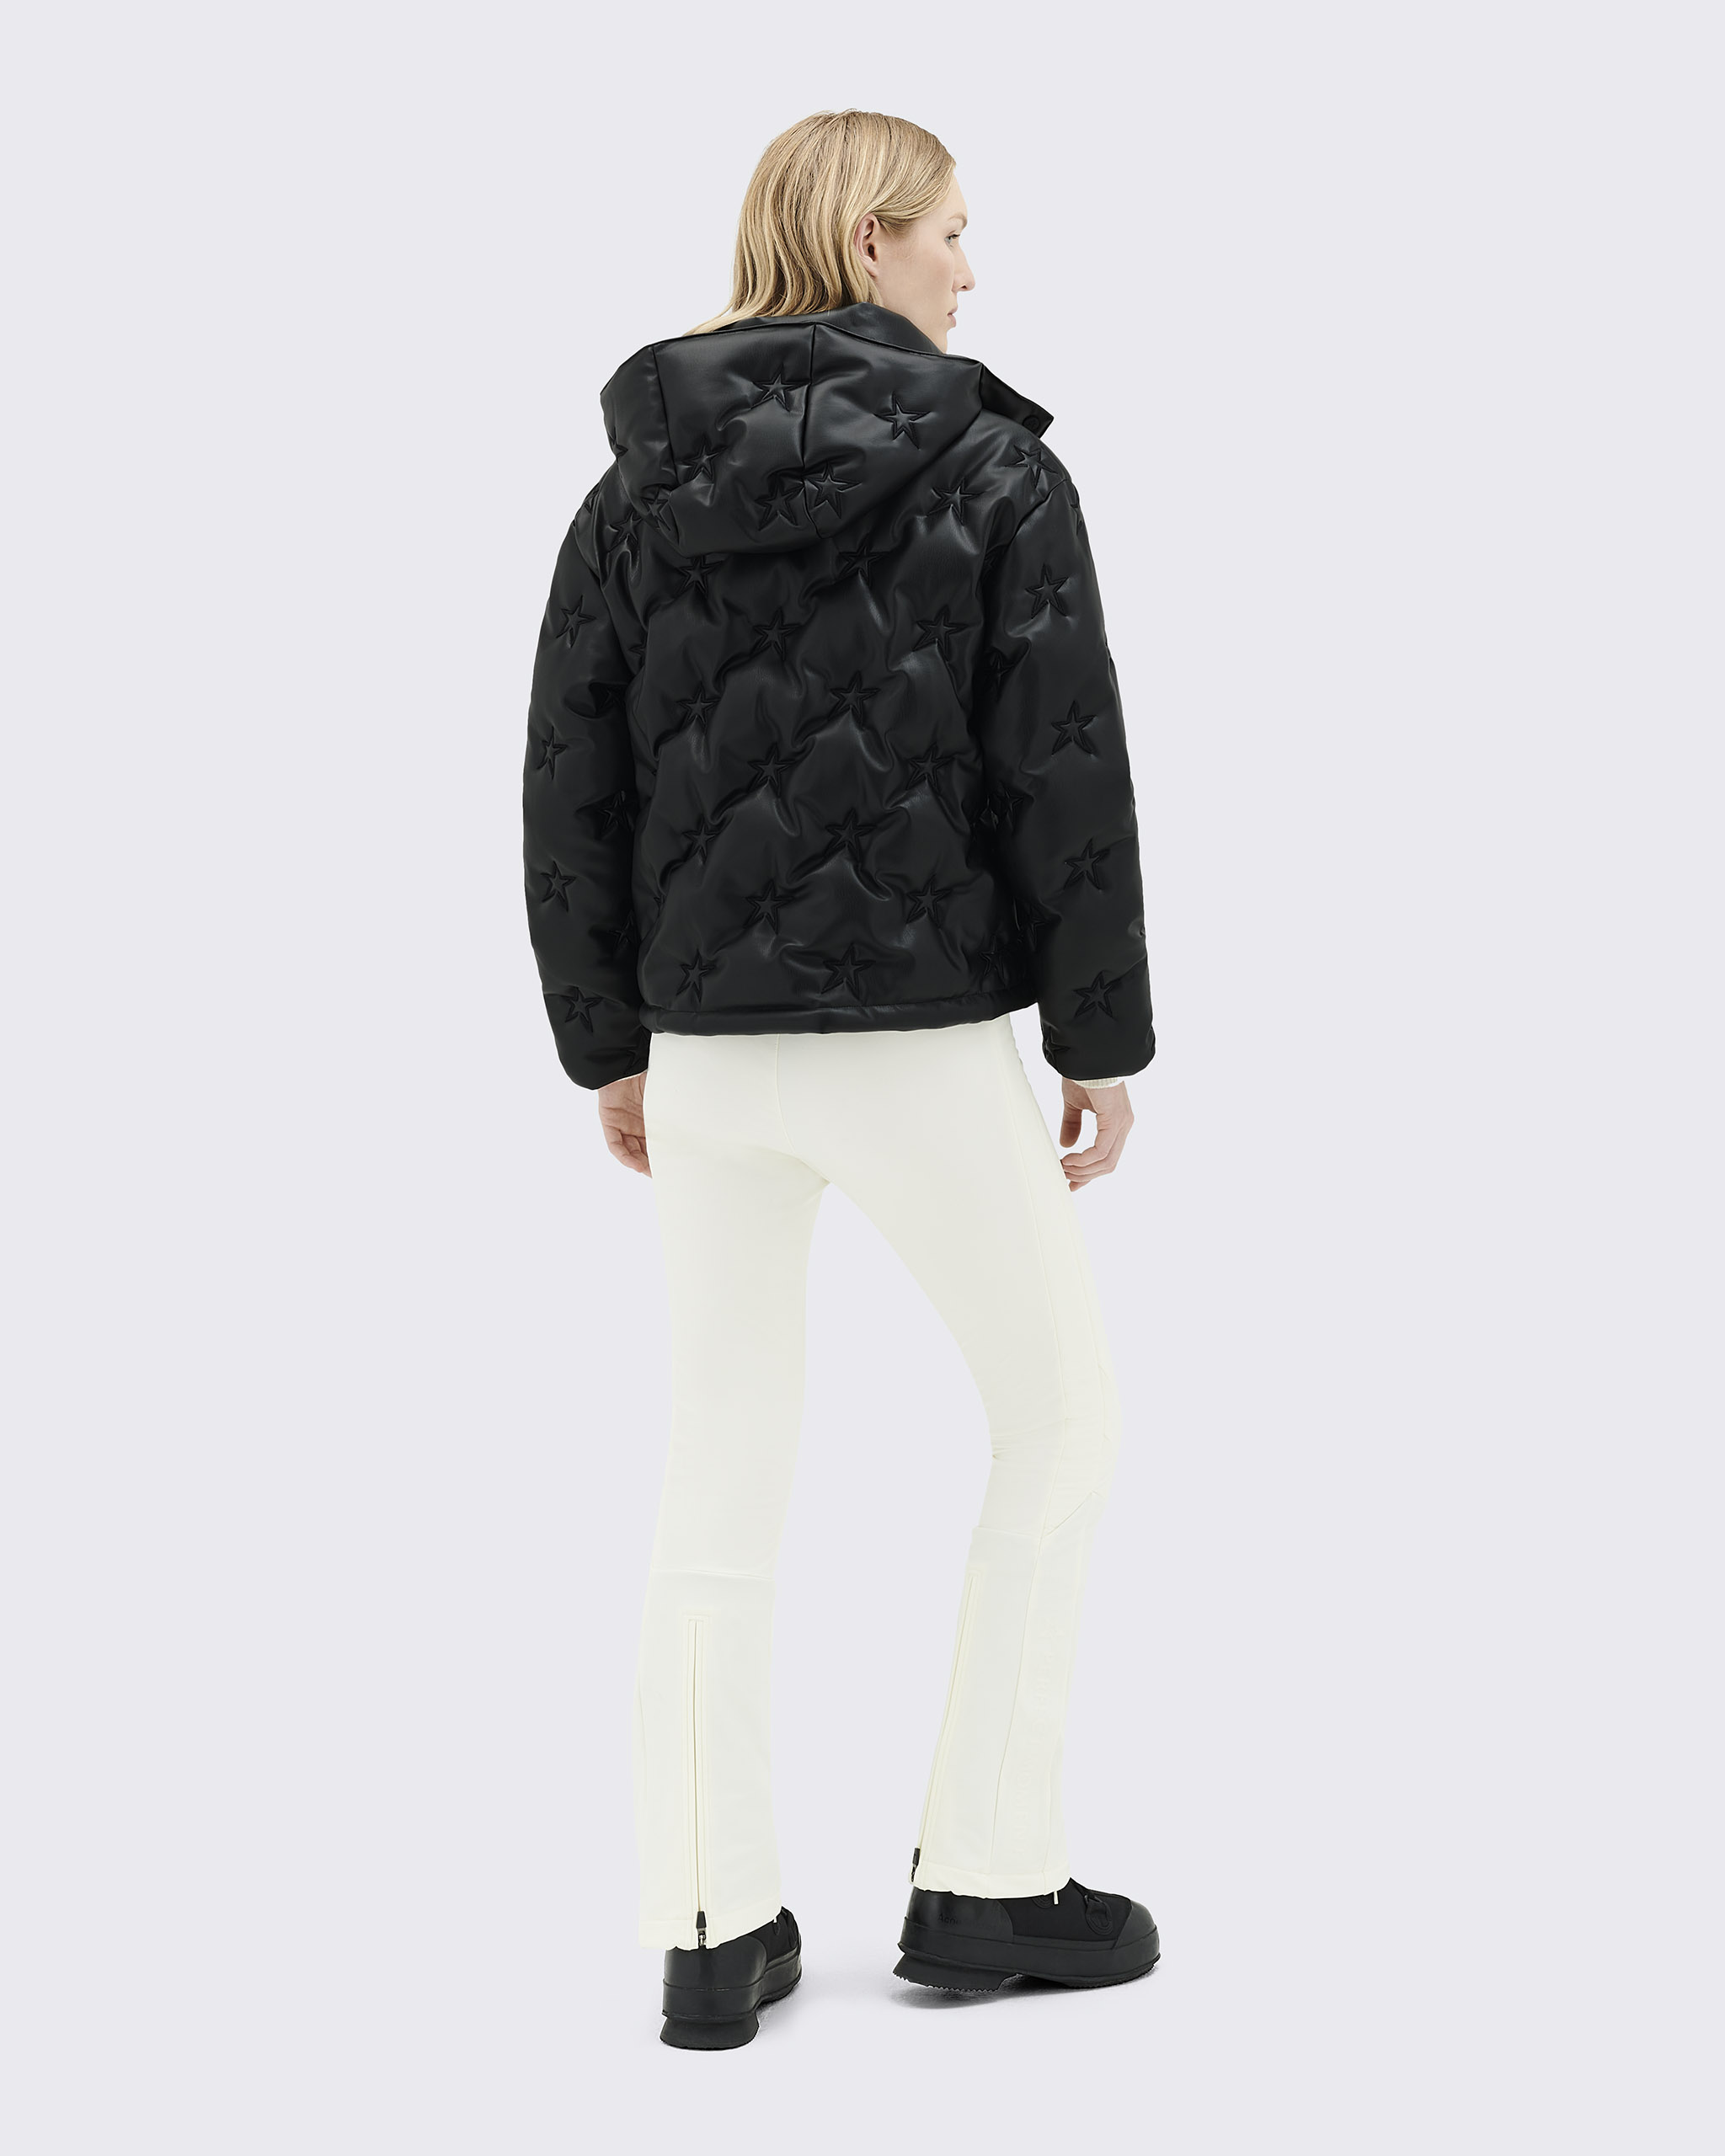 Perfect Moment Taos Faux Leather Down Jacket in Black